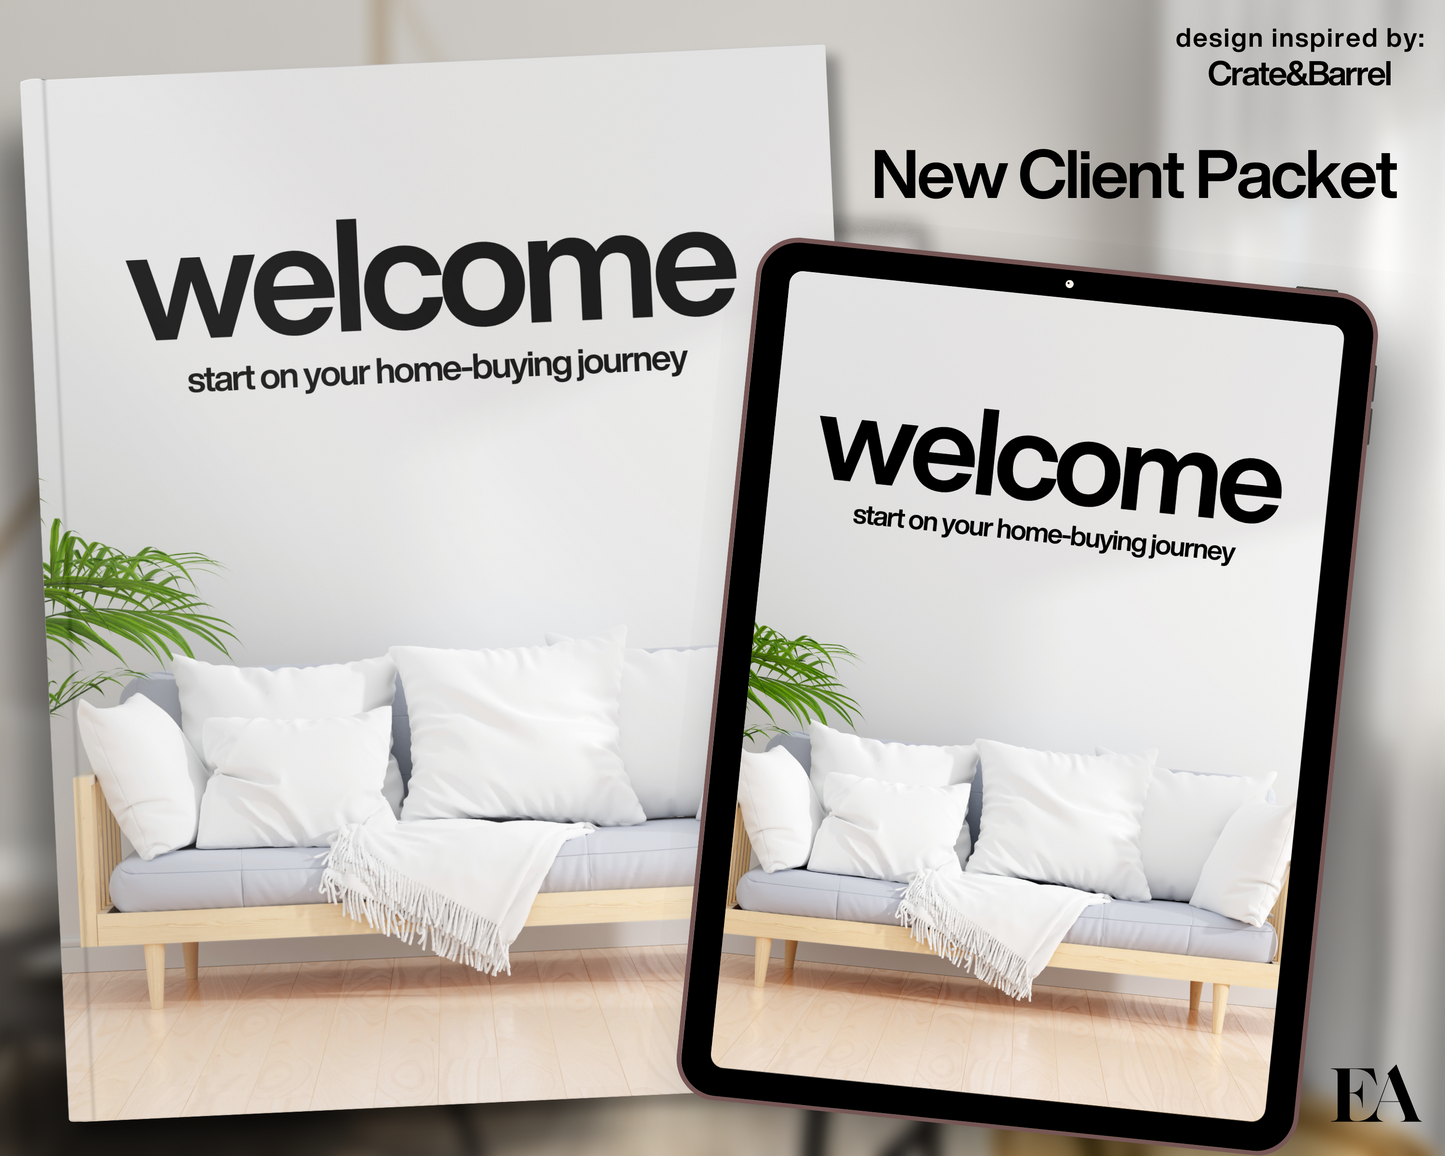 realtor new client,real estate onboard,client intake form,client welcome guide,home buyer guide,home buyer packet,home seller guide,home seller packet,new client onboard,new client packet,real estate client,real estate packet,welcome packet